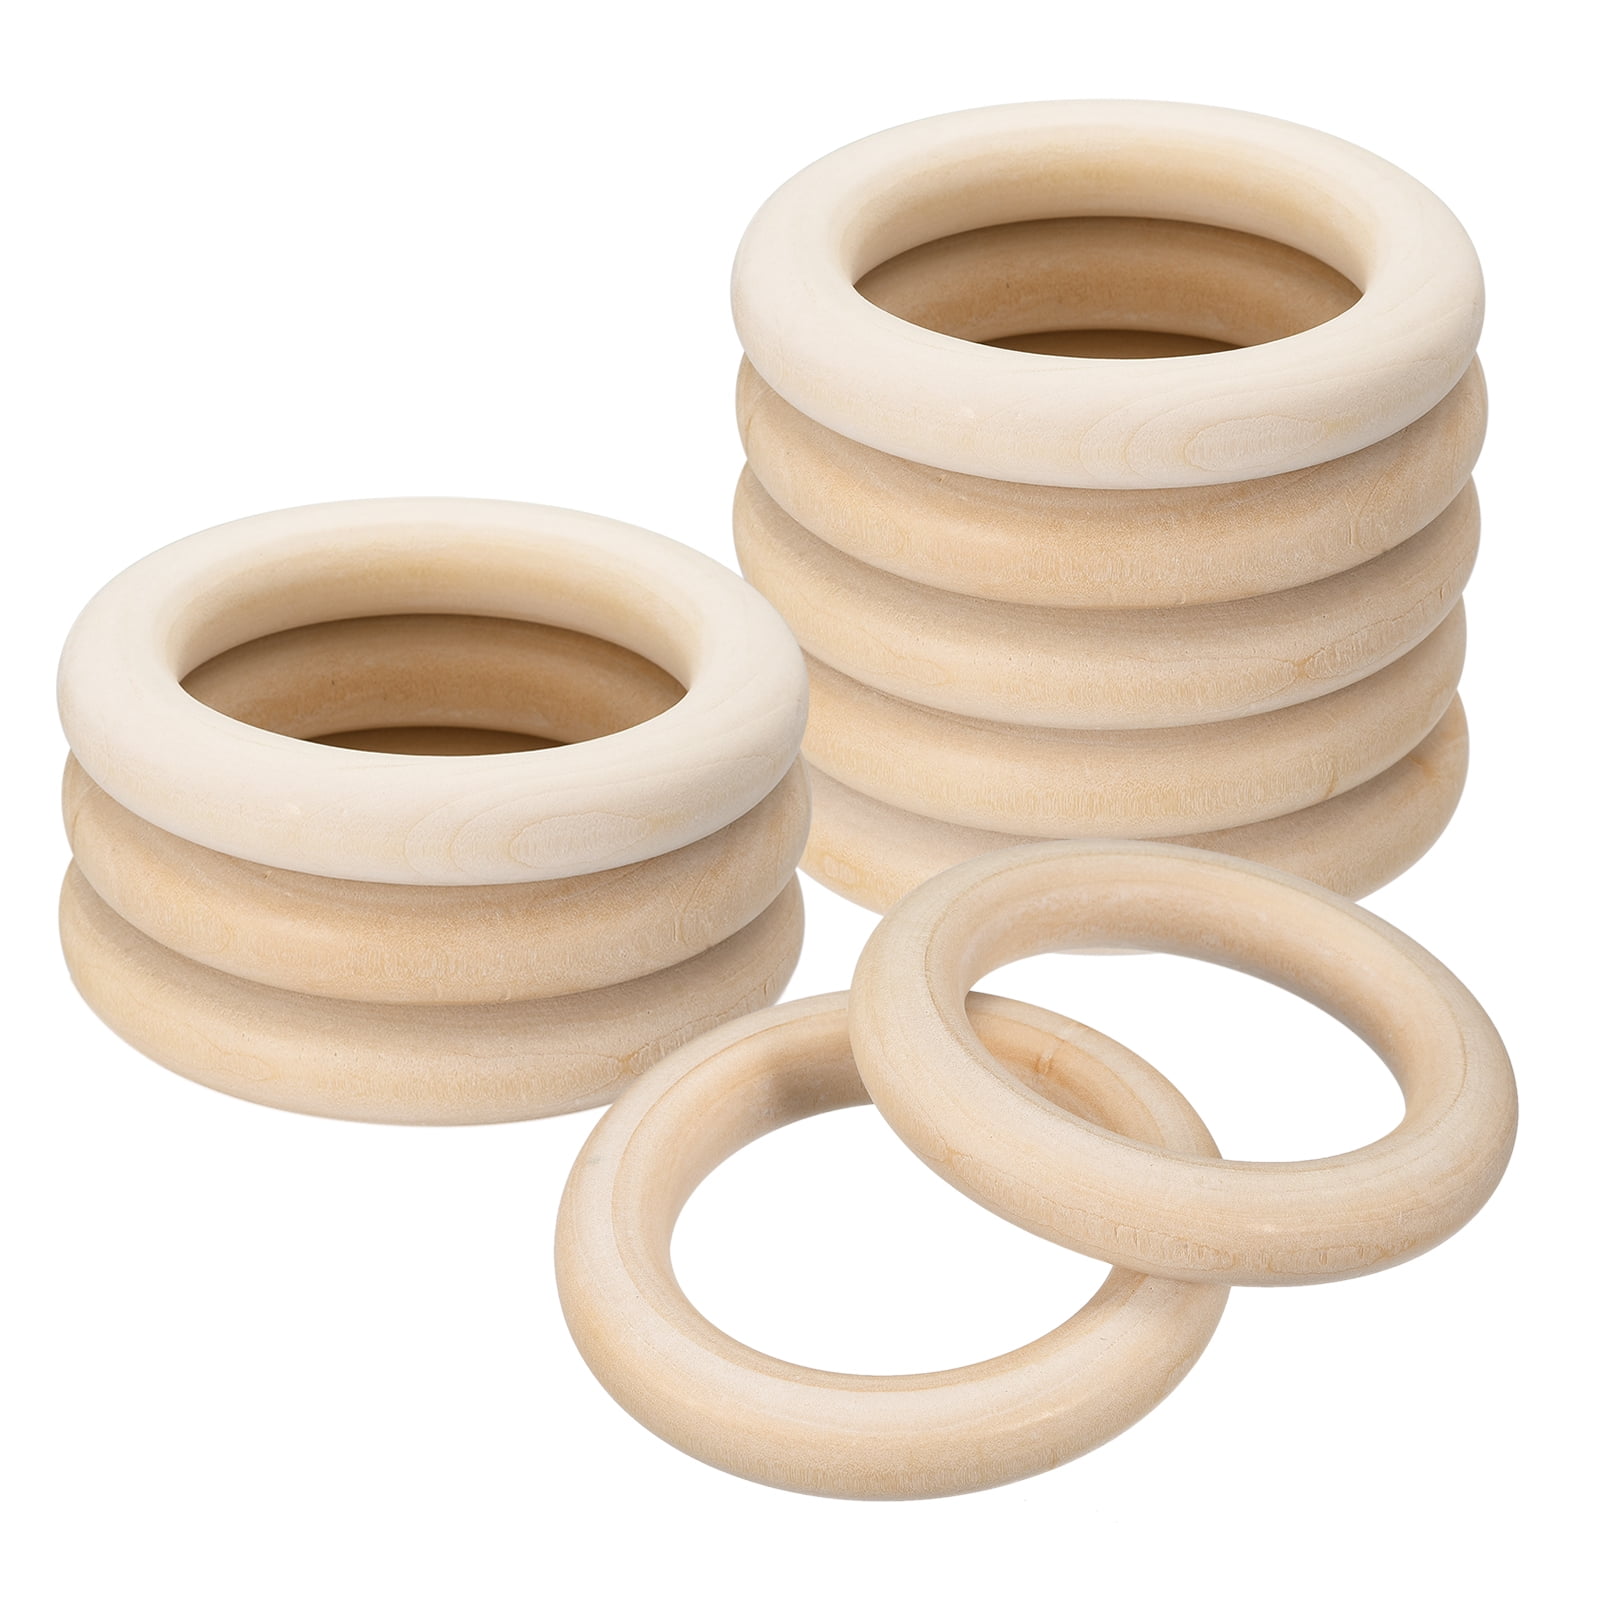 ilauke Unfinished Wood Ring, 10 Pcs Beech Wooden Rings Sturdy and Smooth  Wood Rings for Crafts, Macrame Plant Hangers(70MM) 